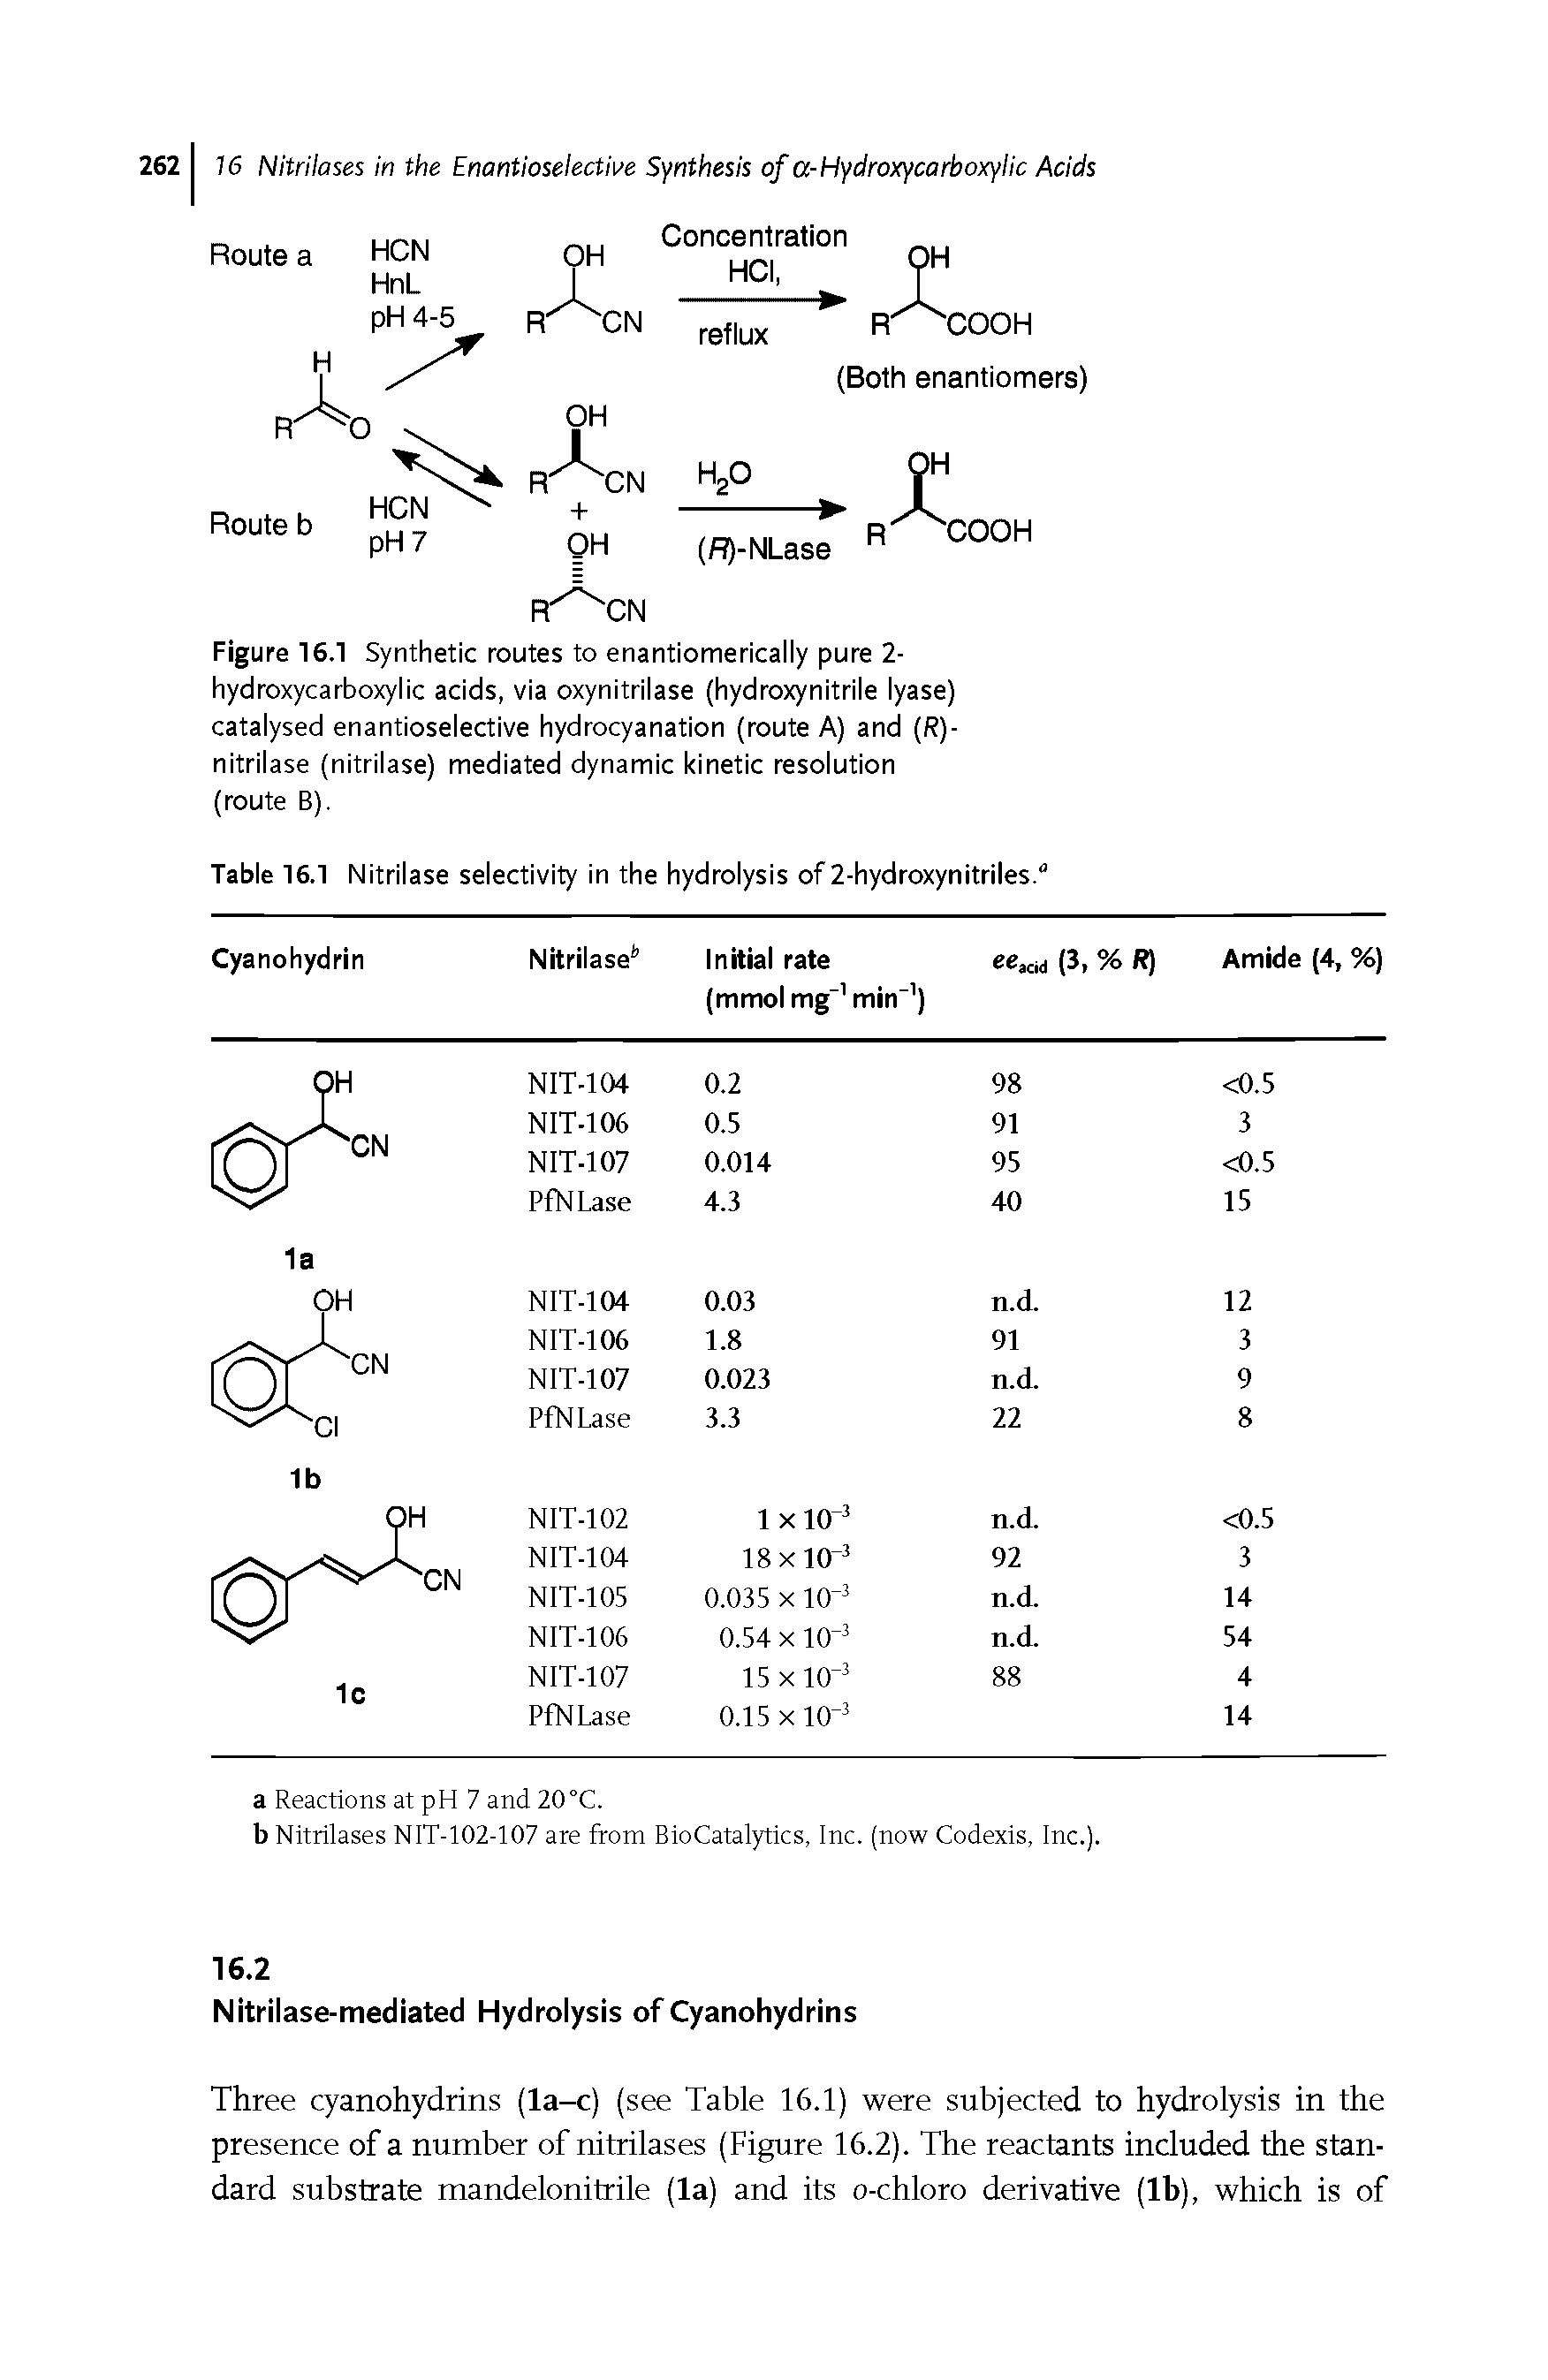 Figure 16.1 Synthetic routes to enantiomerically pure 2-hydroxycarboxylic acids, via oxynitrilase (hydroxynitrile lyase) catalysed enantioselective hydrocyanation (route A) and (R)-nitrilase (nitrilase) mediated dynamic kinetic resolution (route B).